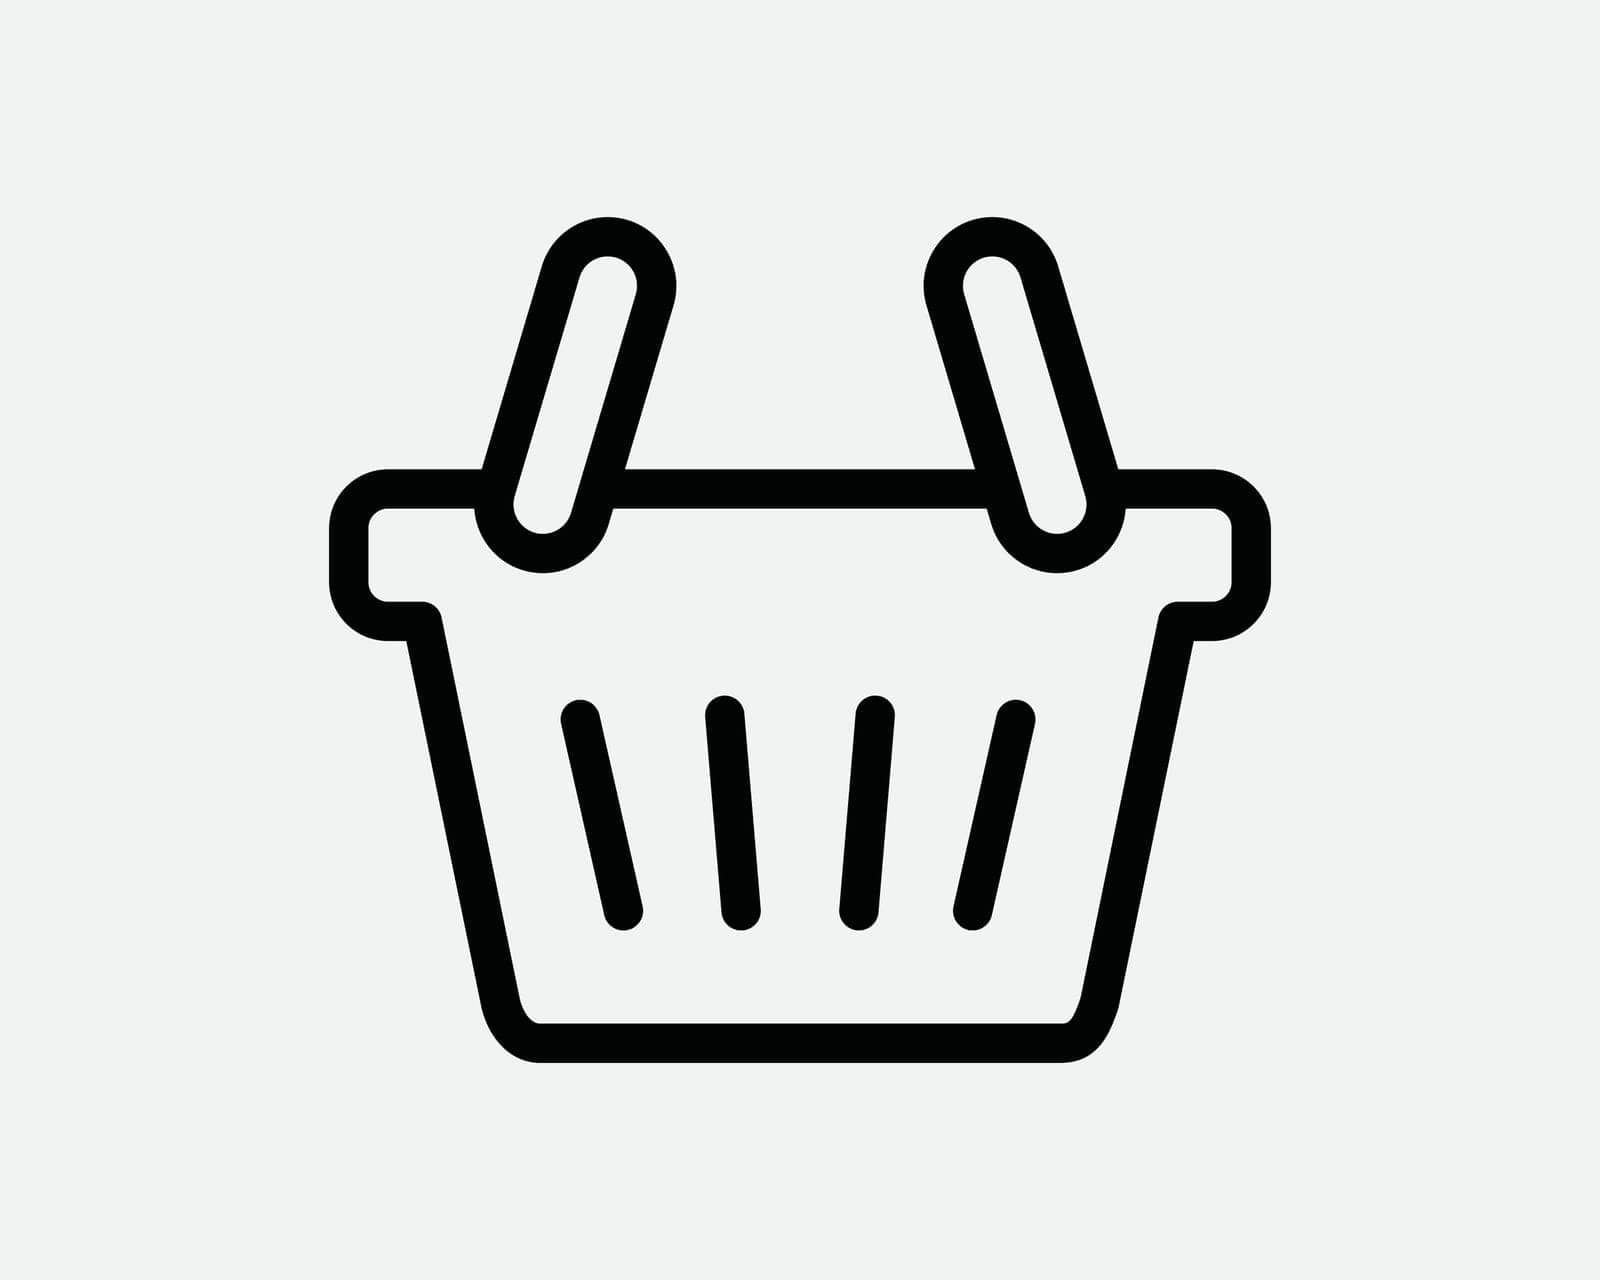 Shopping Basket Line Icon. Checkout Cart Online Linear Symbol. Sale Market Grocery Retail Shop Sign. Black Thin Vector Graphic Illustration Clipart